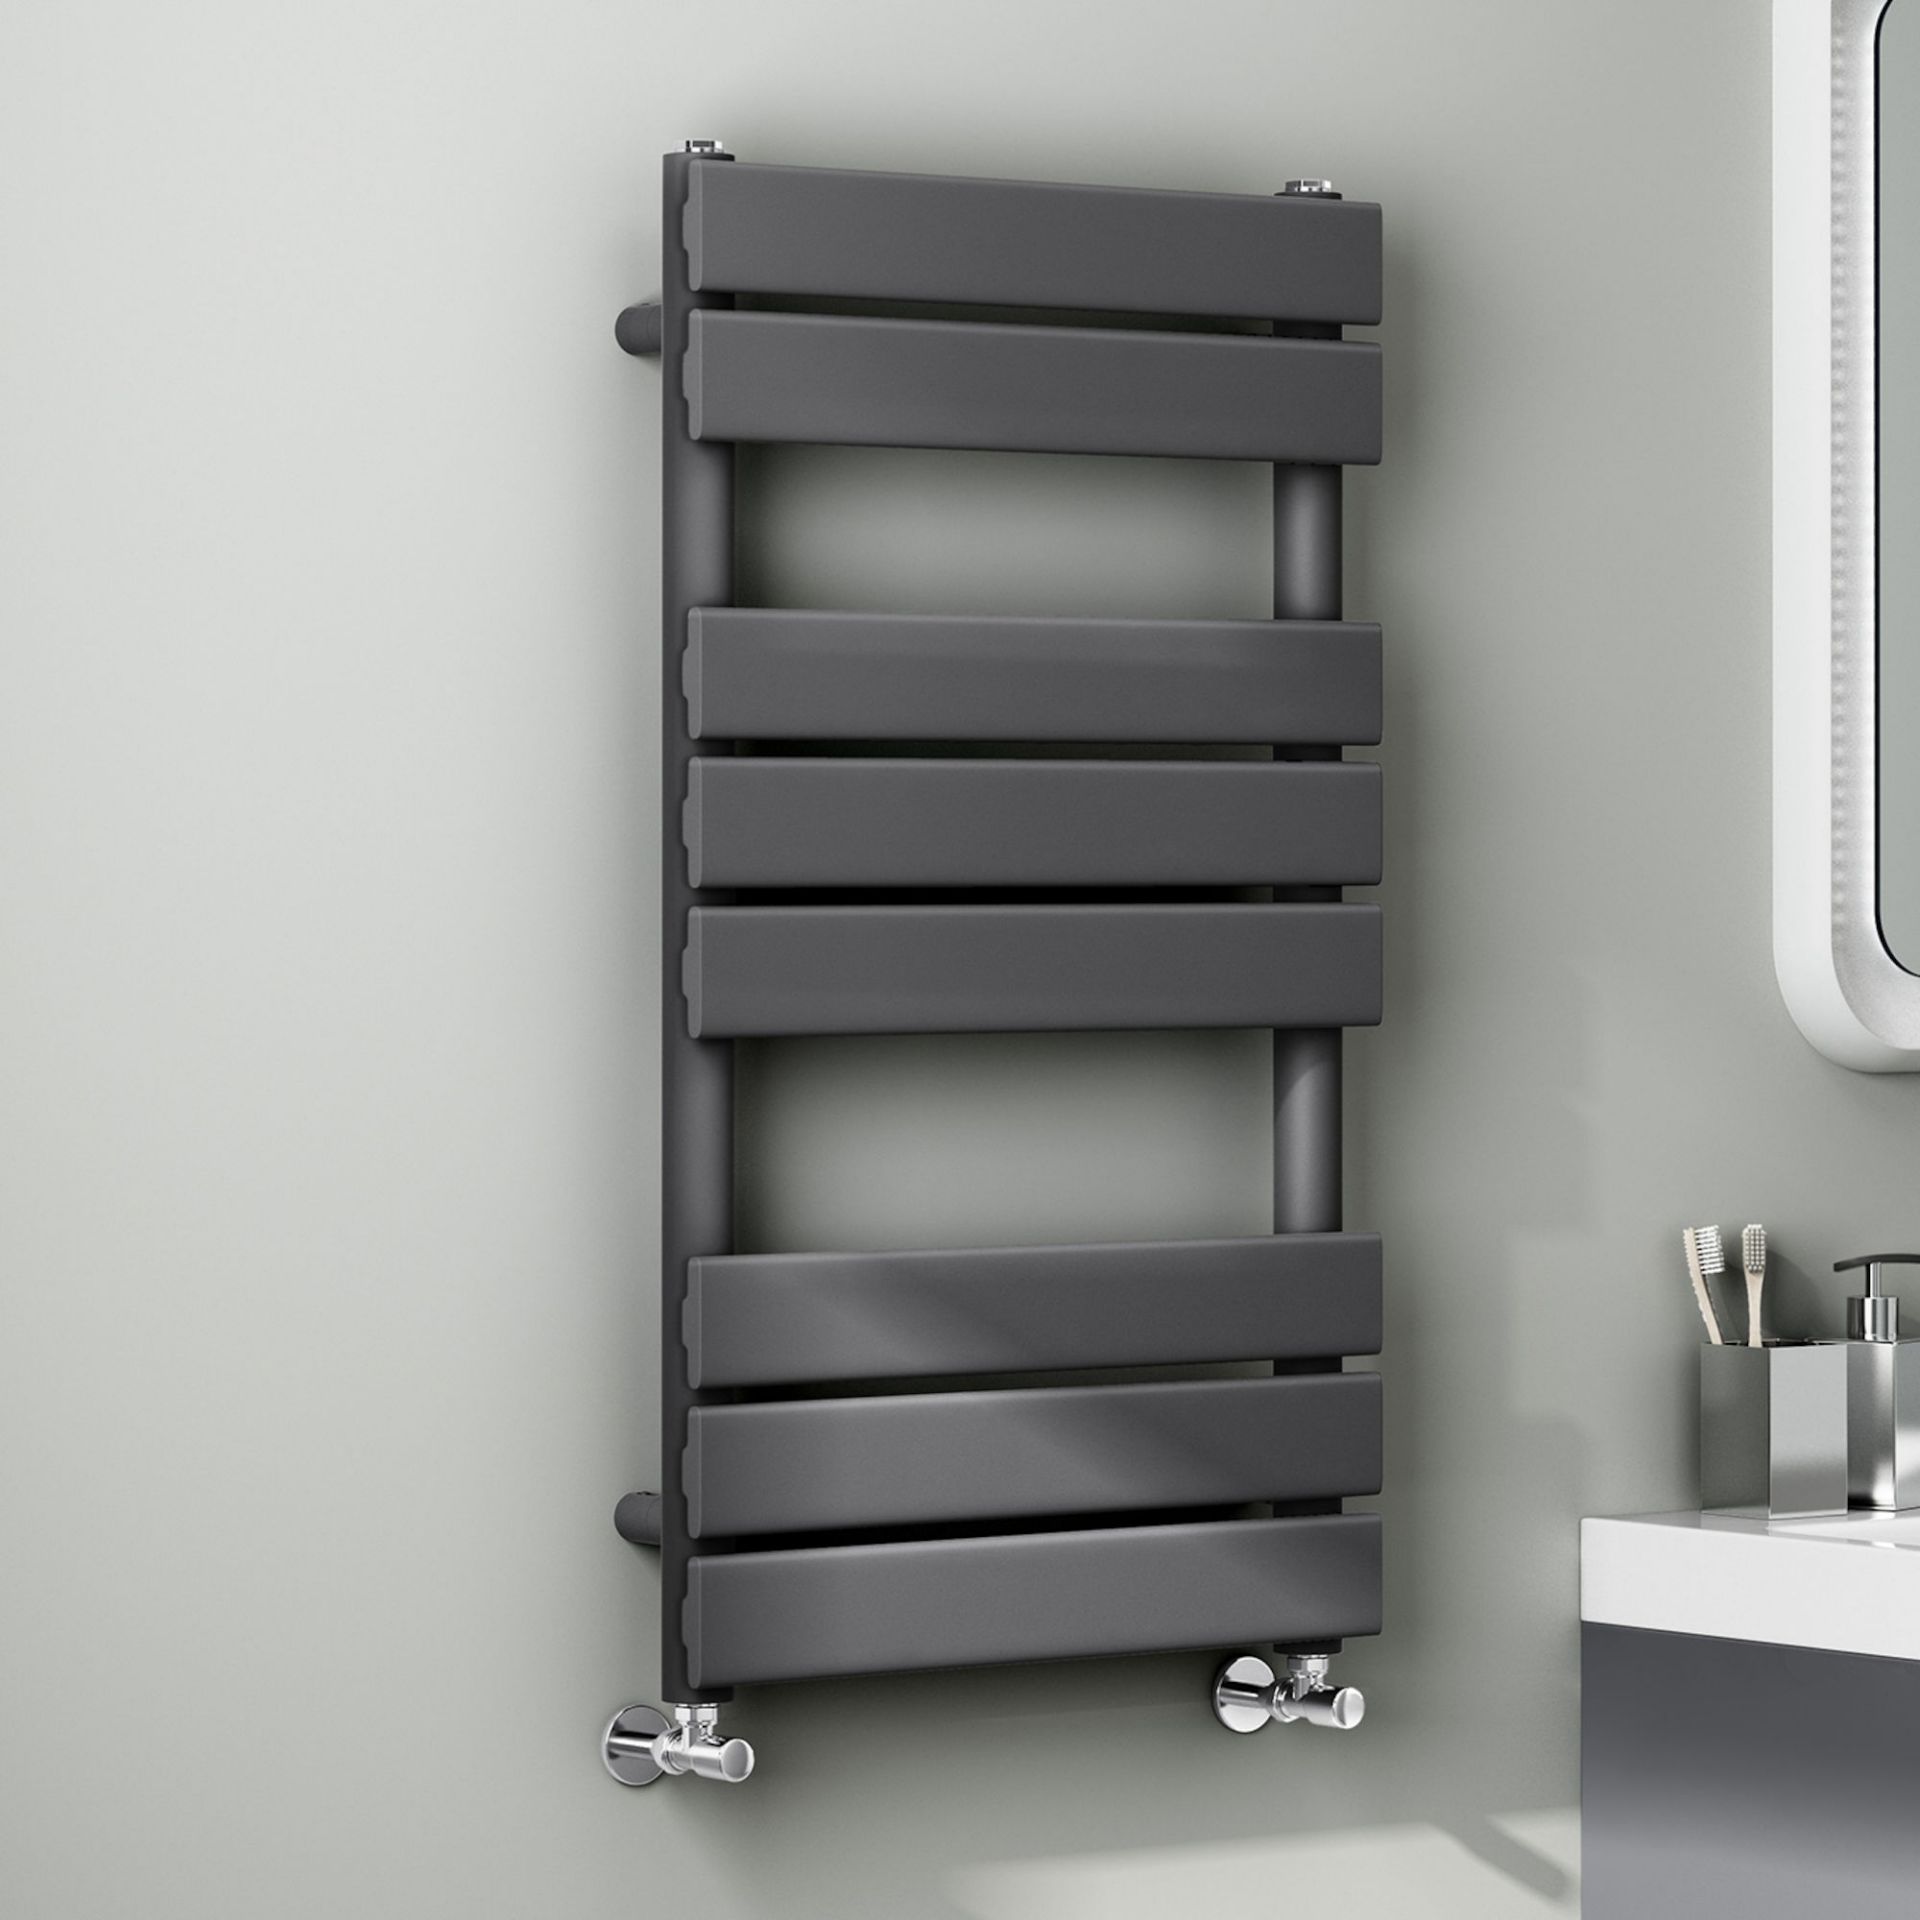 (AA53) 800x450mm Anthracite Flat Panel Ladder Towel Radiator. RRP £254.99. we use low carbon s...